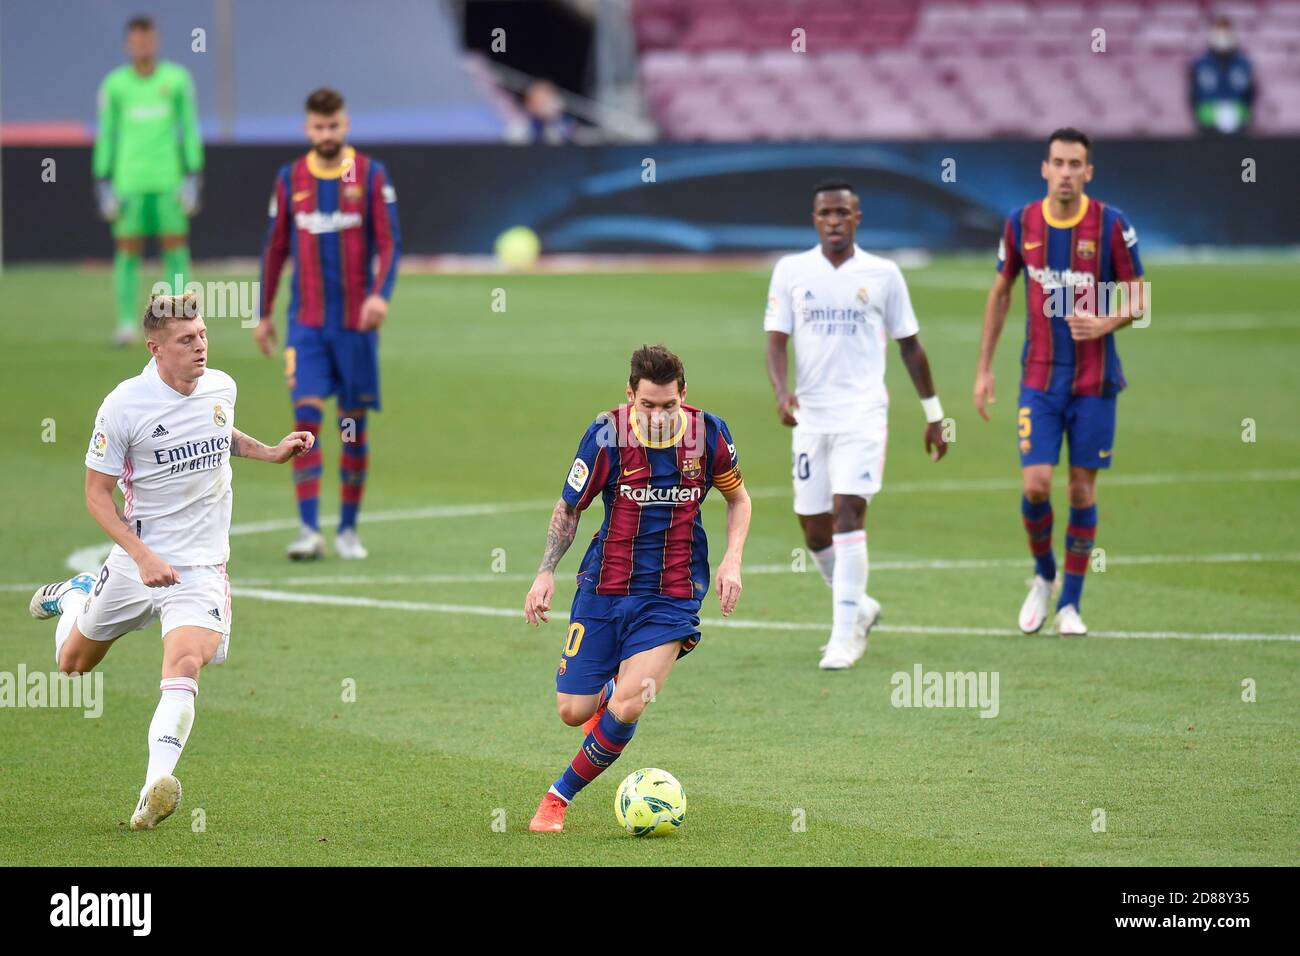 Lionel Messi of FC Barcelona and Toni Kroos of Real Madrid during the La Liga match between FC Barcelona and Real Madrid played at Camp Nou Stadium on October 24, 2020 in Barcelona, Spain. (Photo by Sergio Ruiz/PRESSINPHOTO) Credit: Pro Shots/Alamy Live News Stock Photo